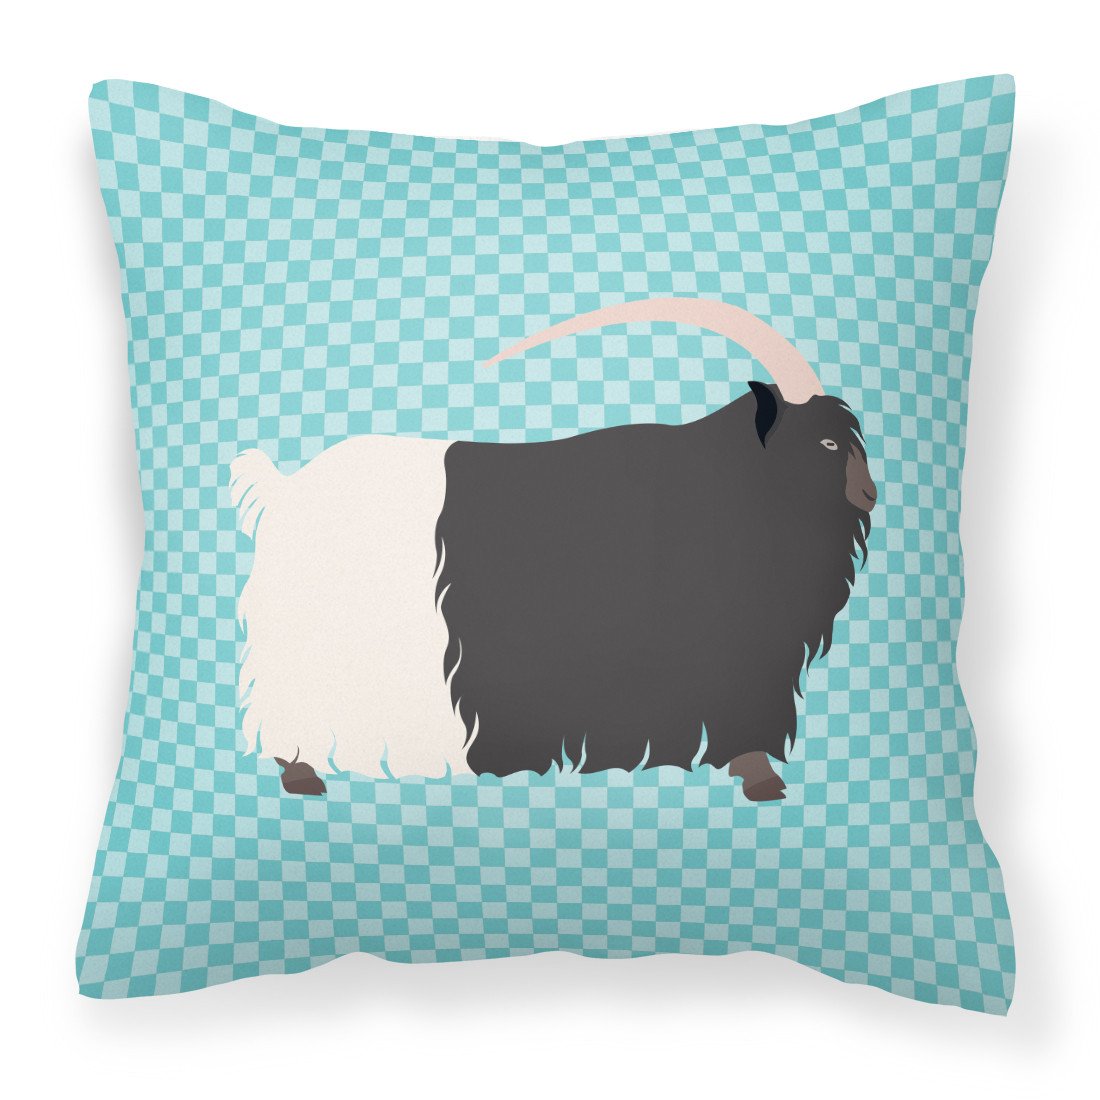 Welsh Black-Necked Goat Blue Check Fabric Decorative Pillow BB8061PW1818 by Caroline's Treasures